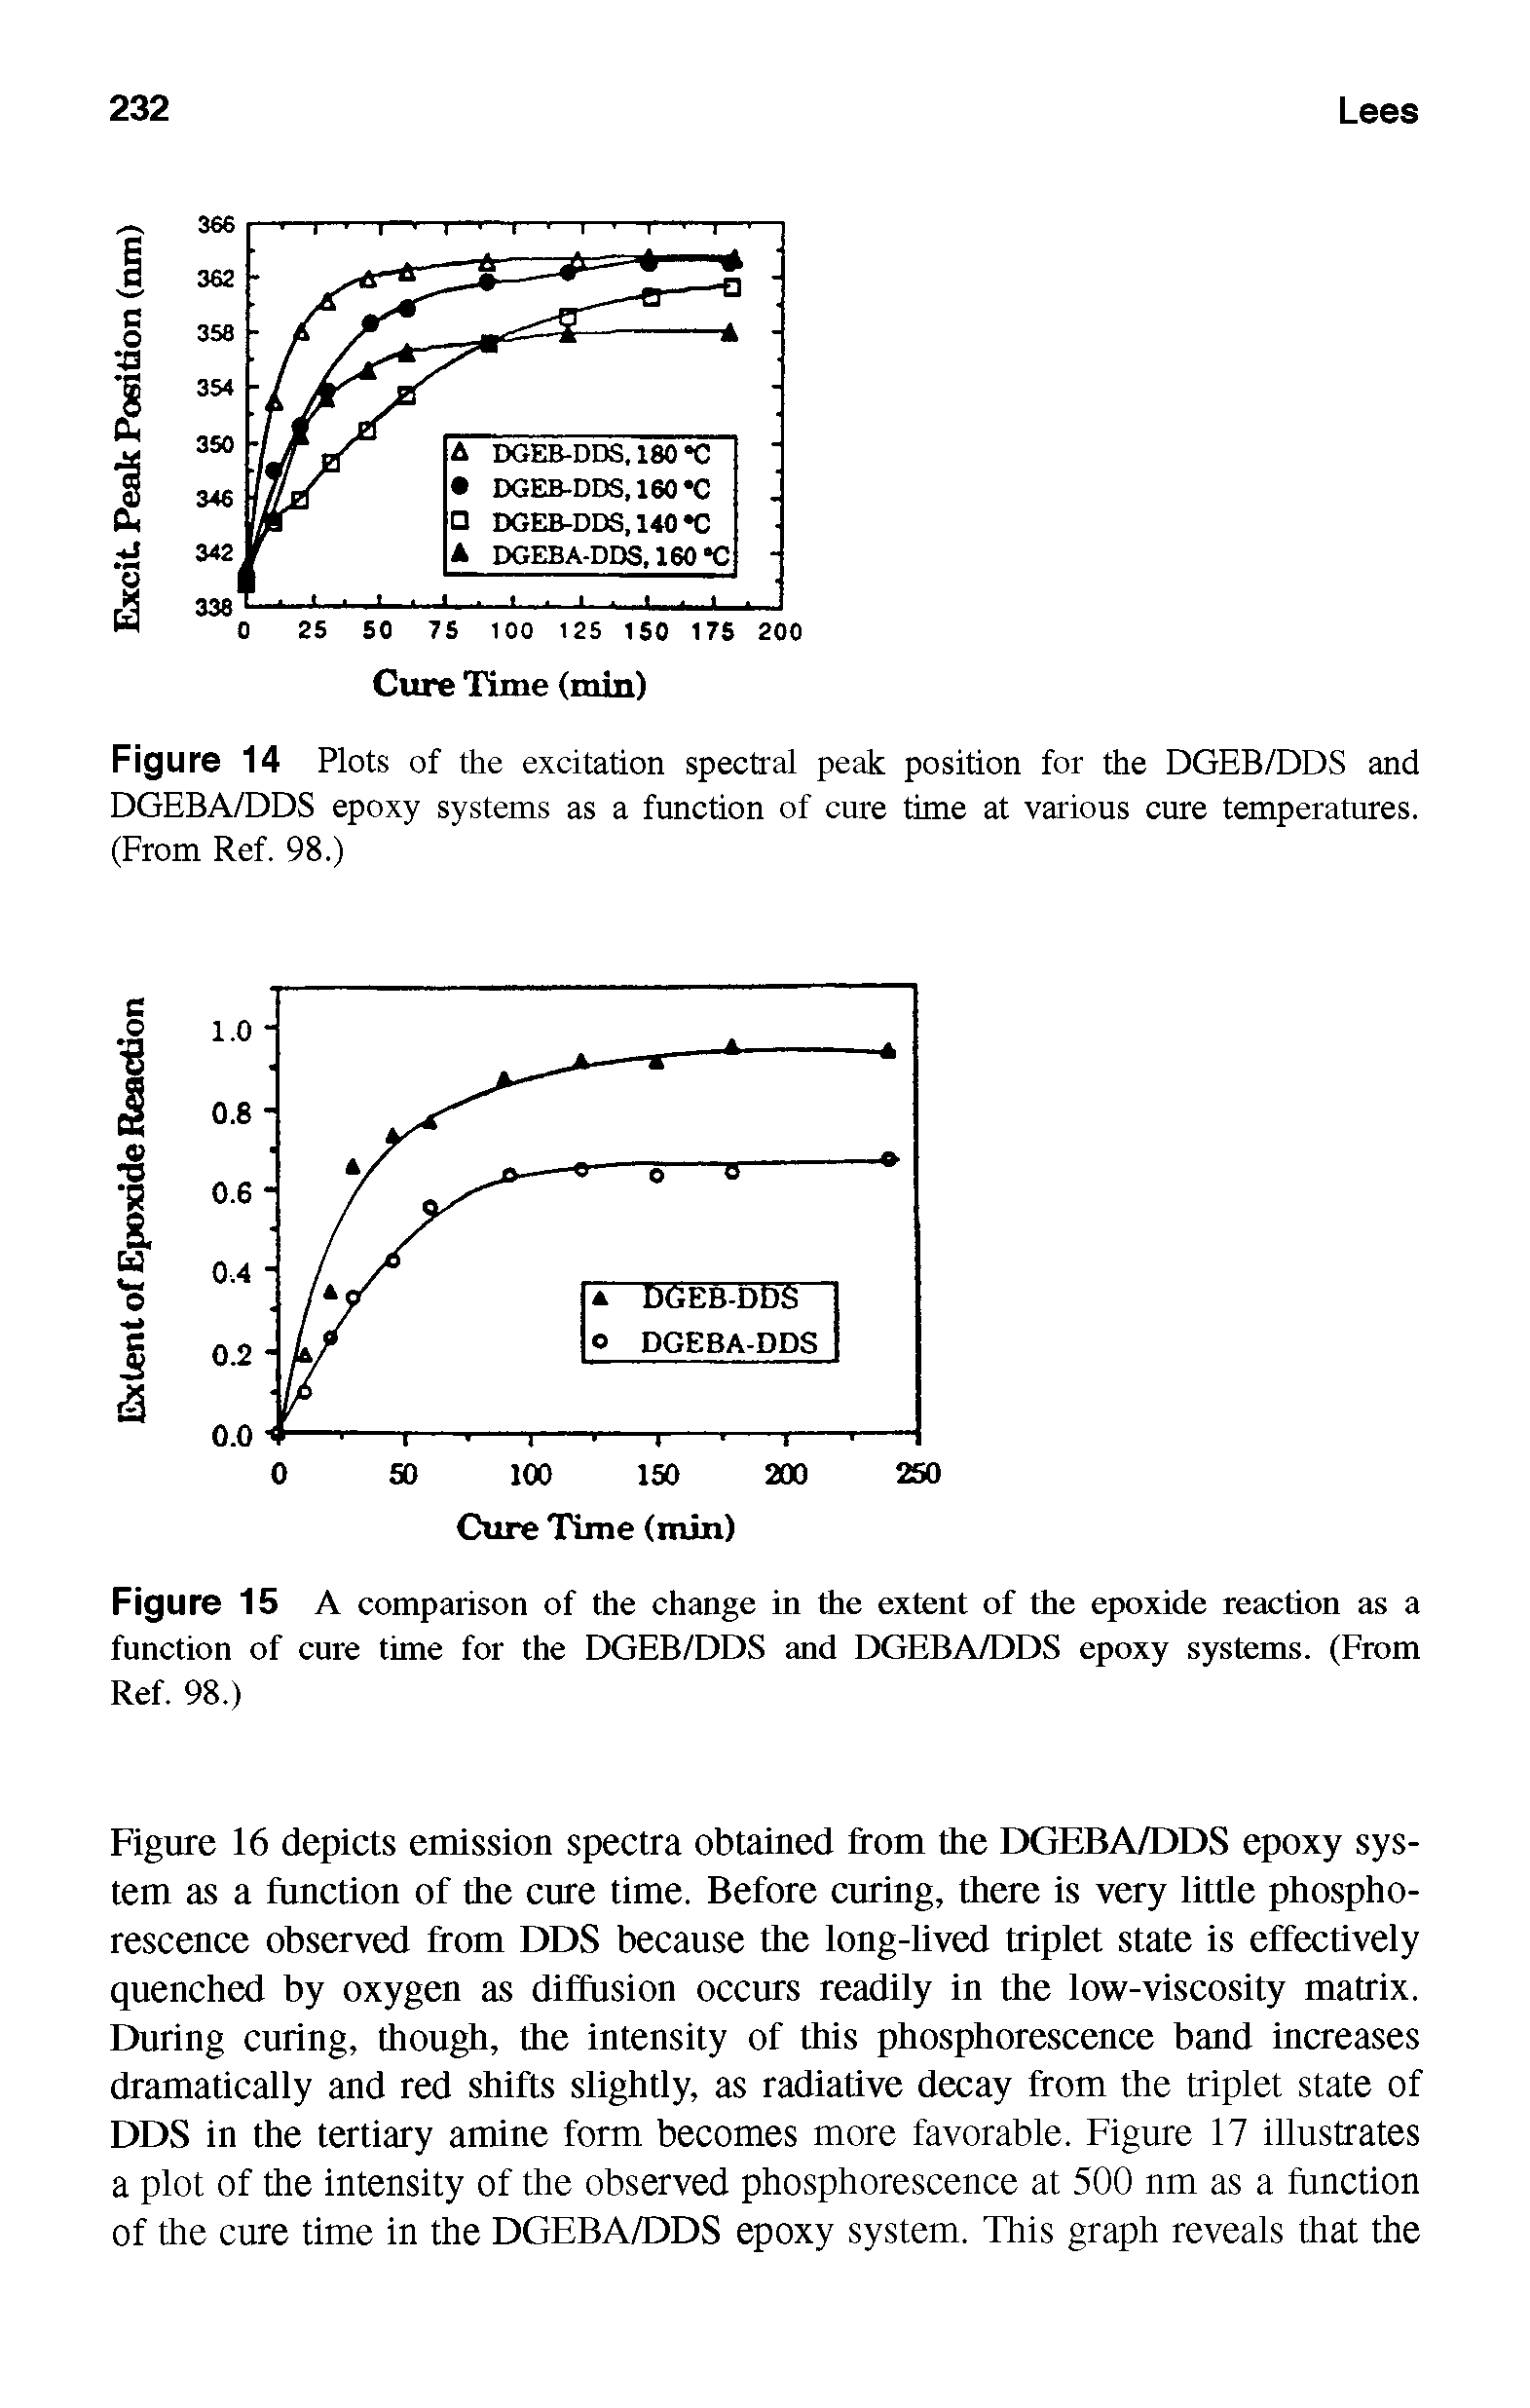 Figure 15 A comparison of the change in the extent of the epoxide reaction as a function of cure time for the DGEB/DDS and DGEBA/DDS epoxy systems. (From Ref. 98.)...